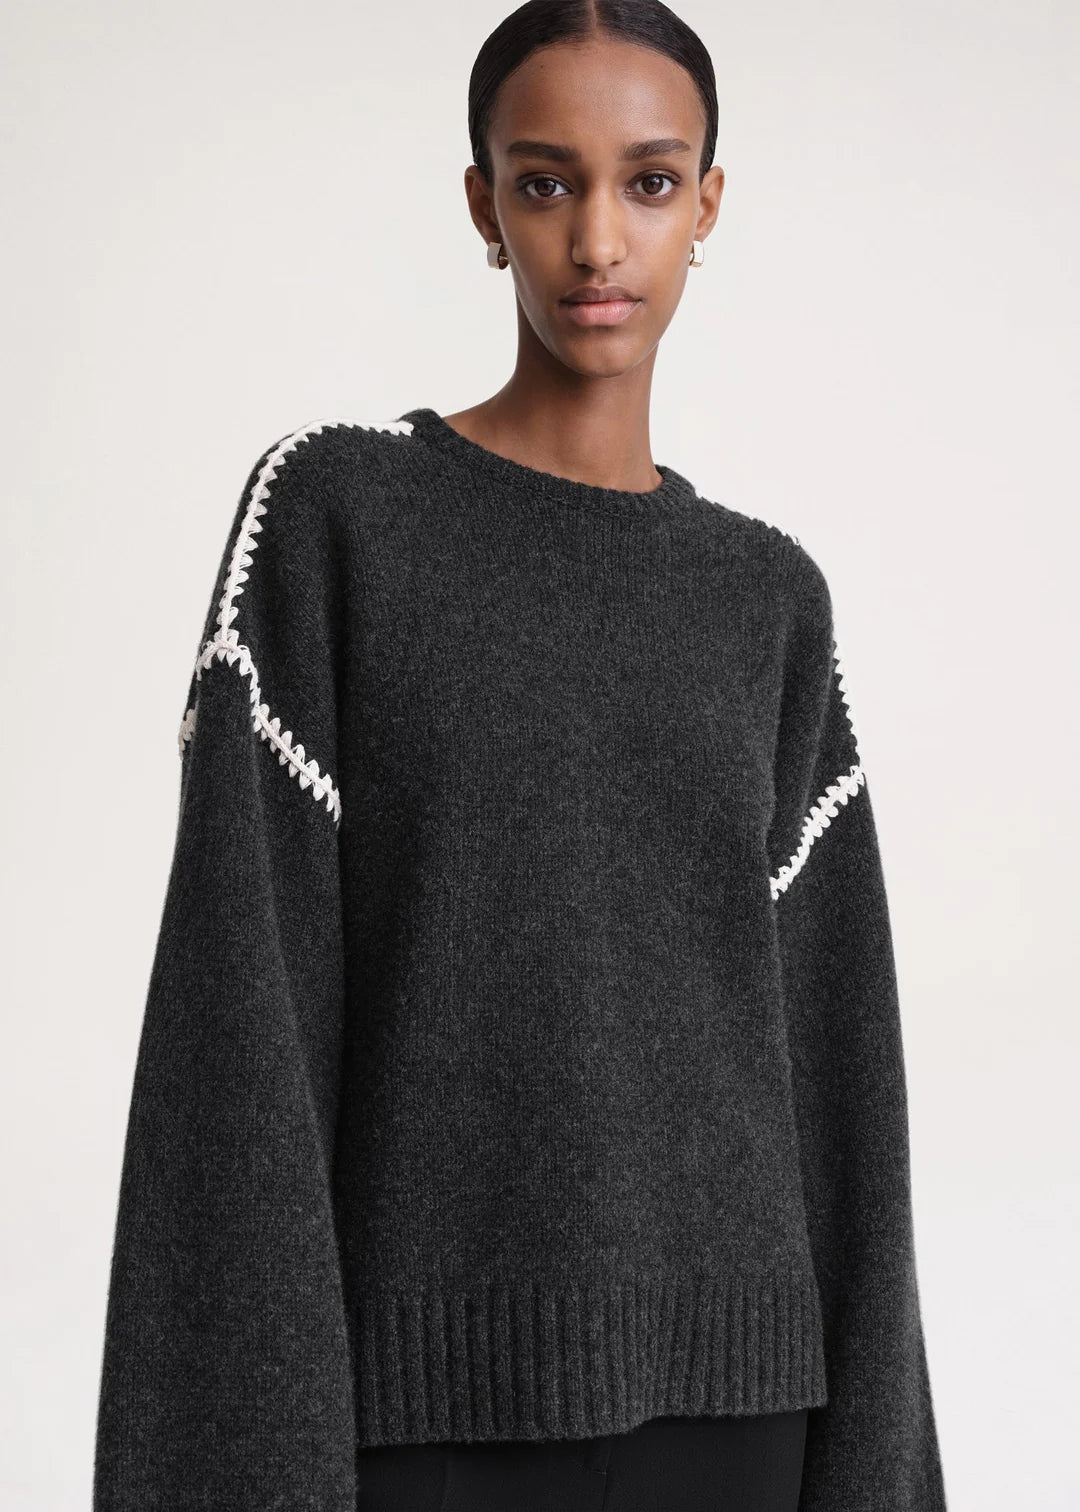 Embroidered Knit, Grey, Pullover